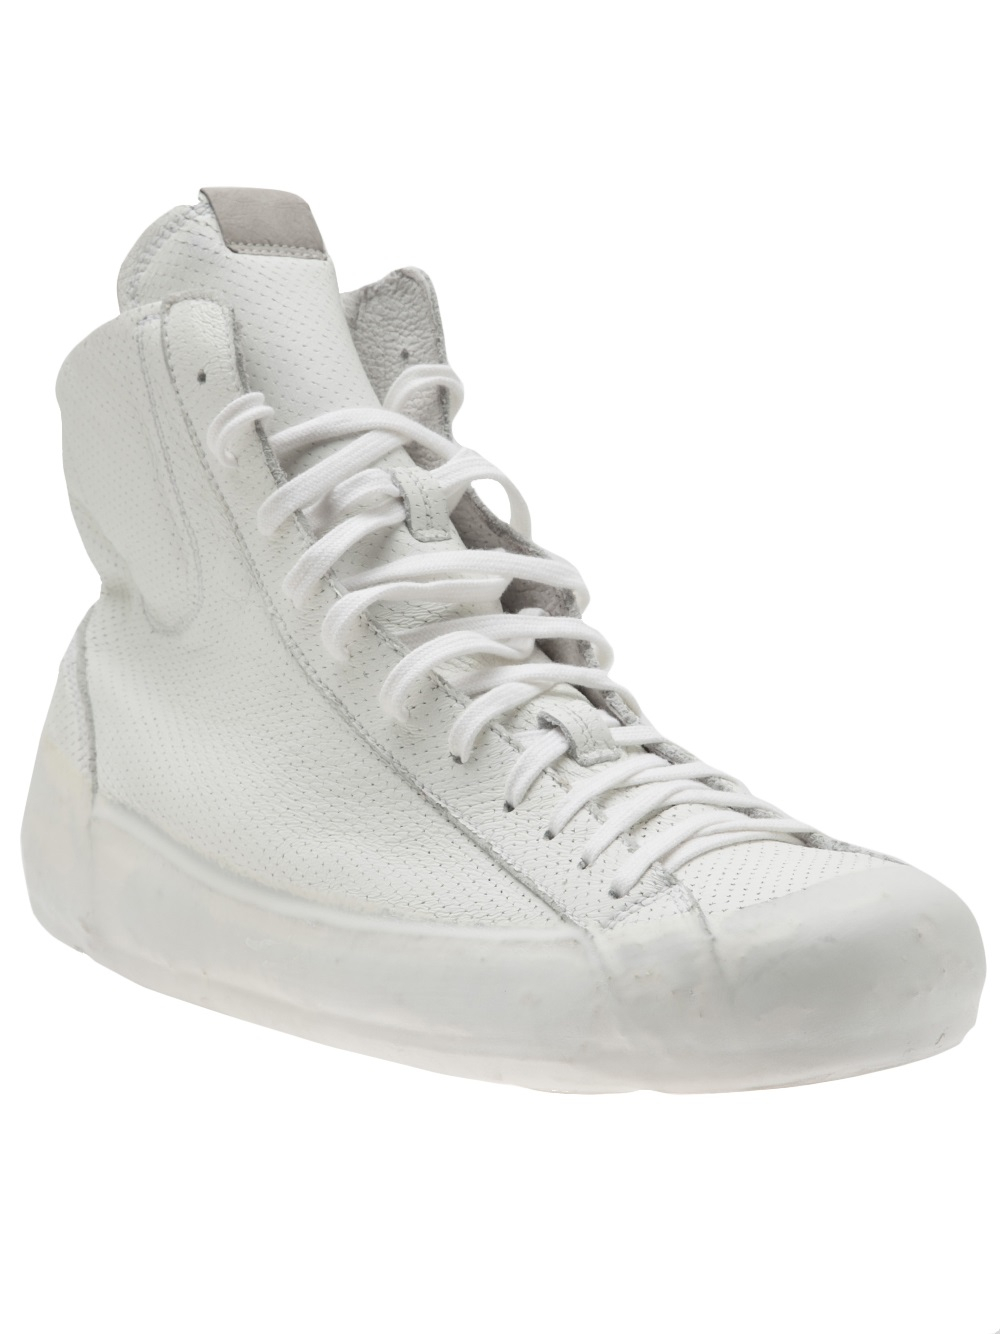 Oxs Rubber Soul Leather High-Top Sneakers in White for Men - Lyst